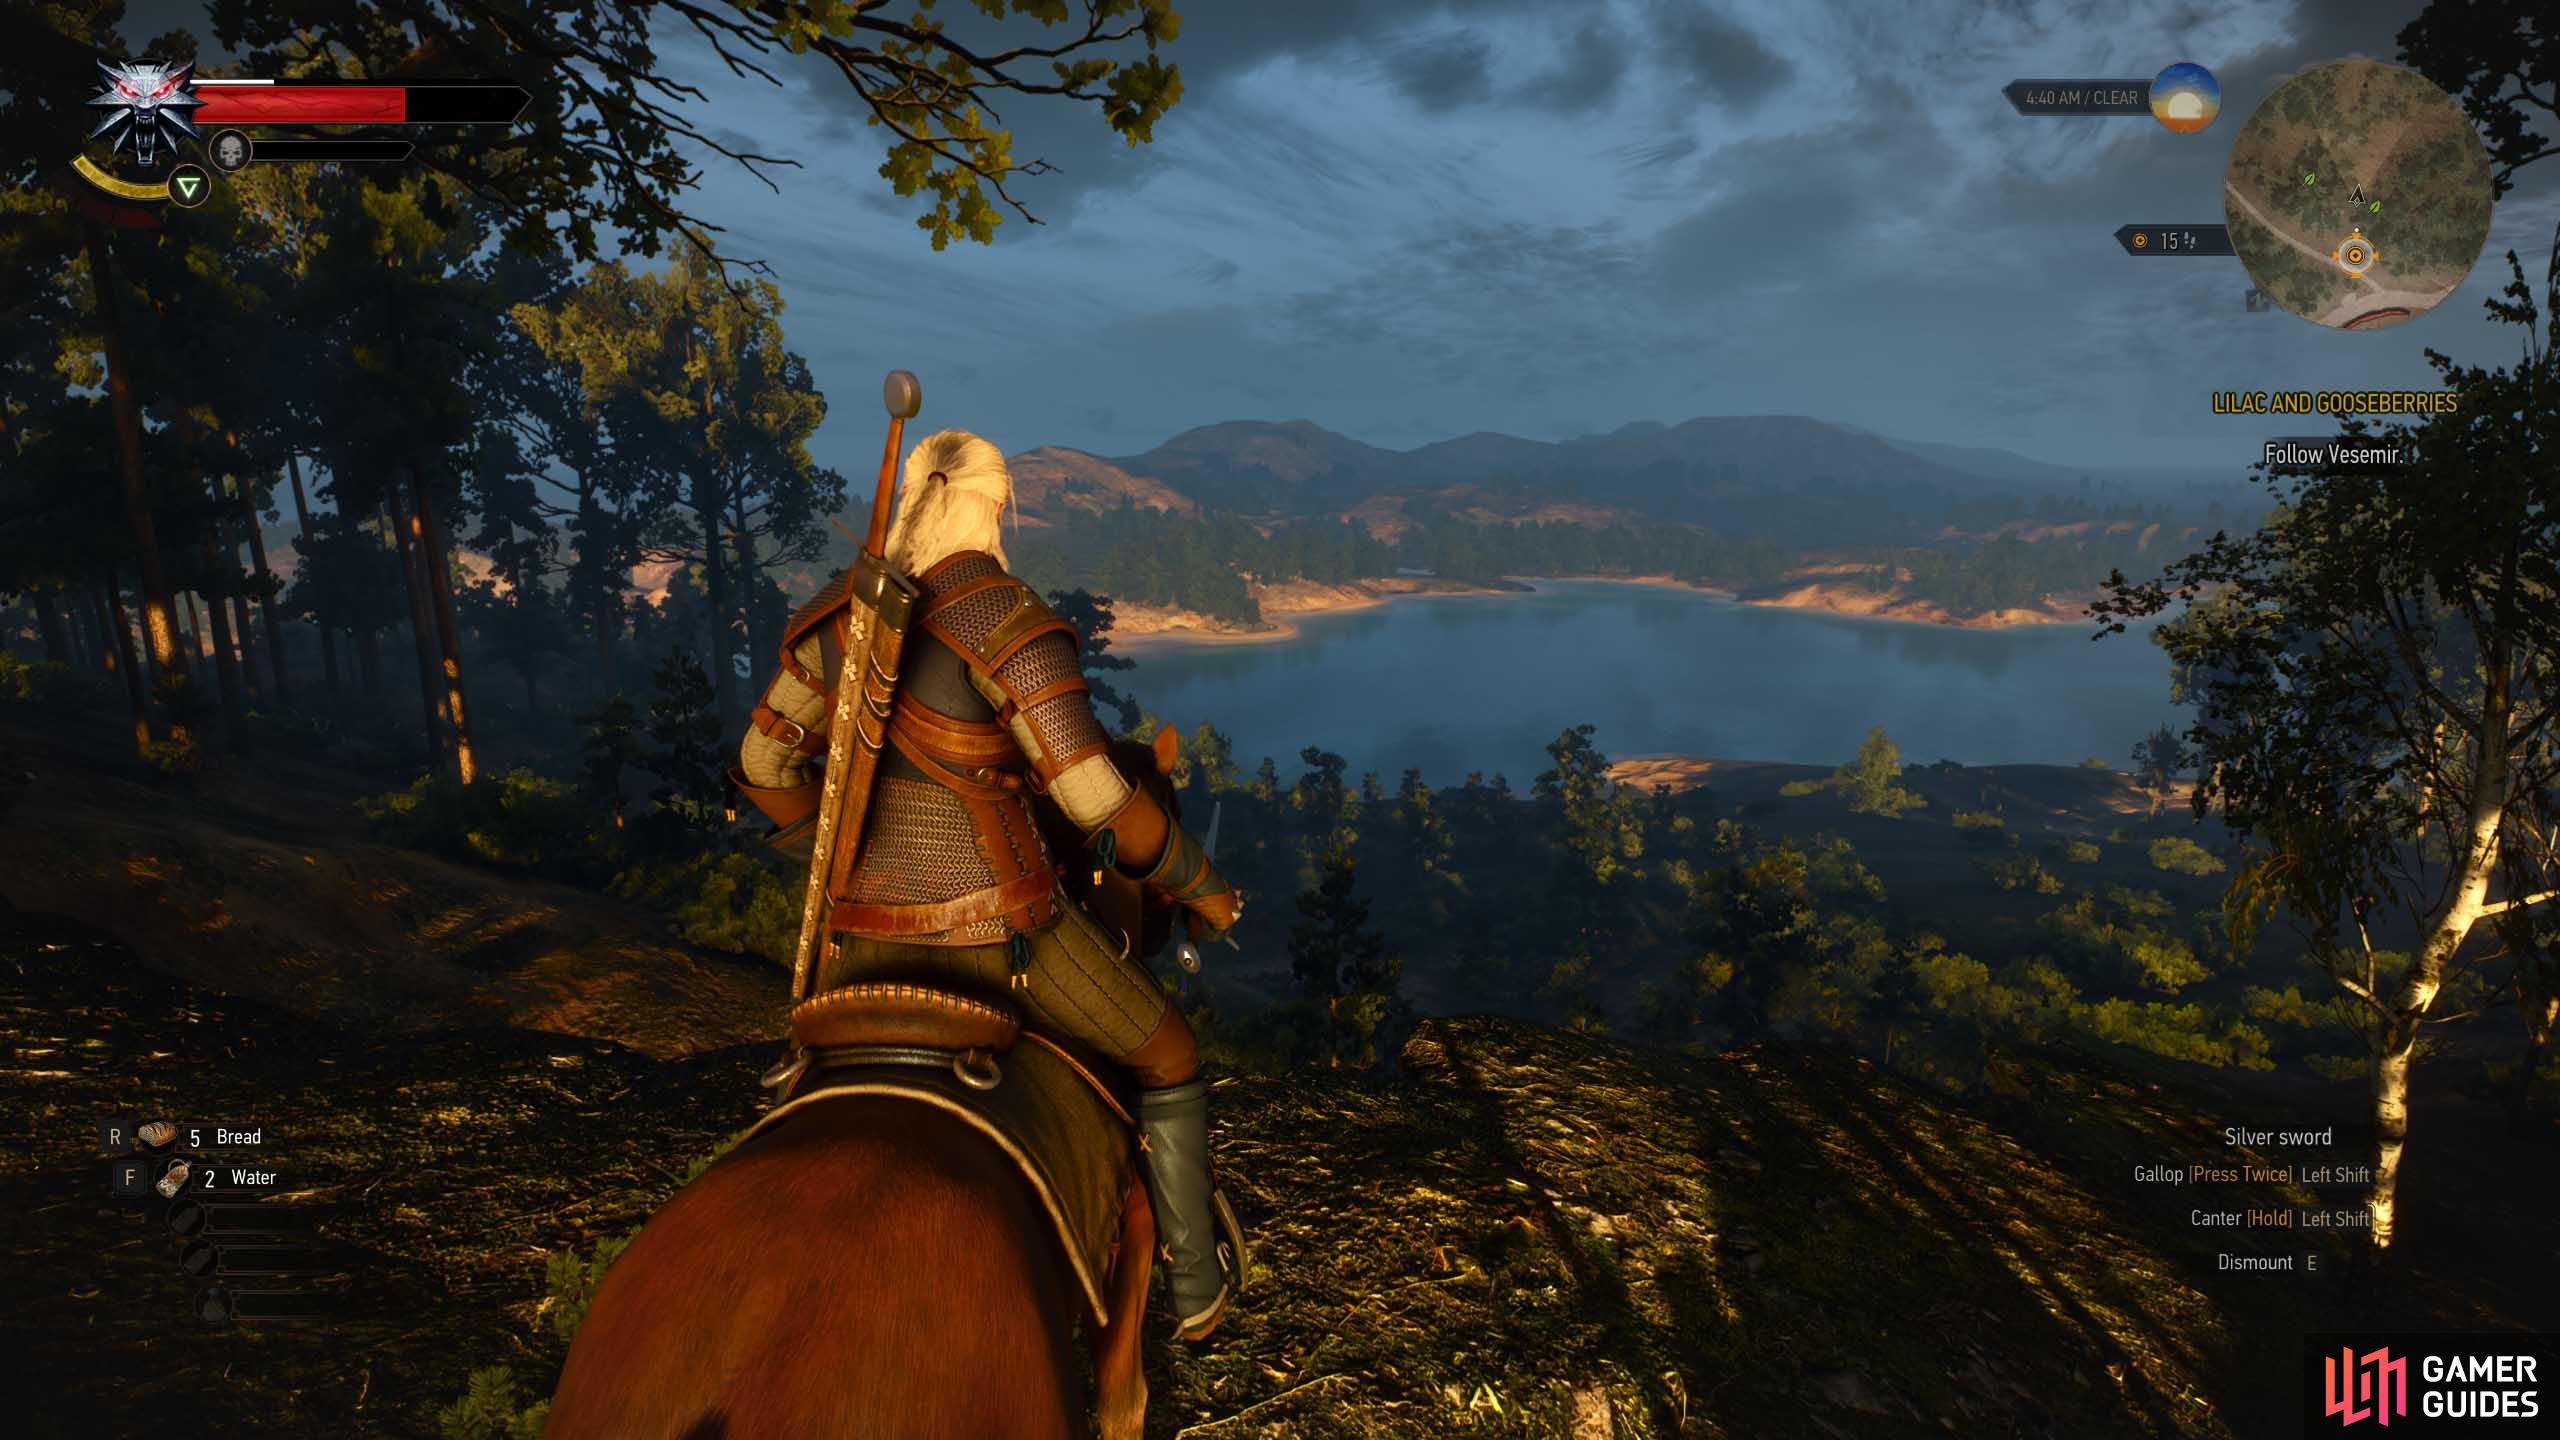 The Witcher 3 for FREE if you own the game on PC or console